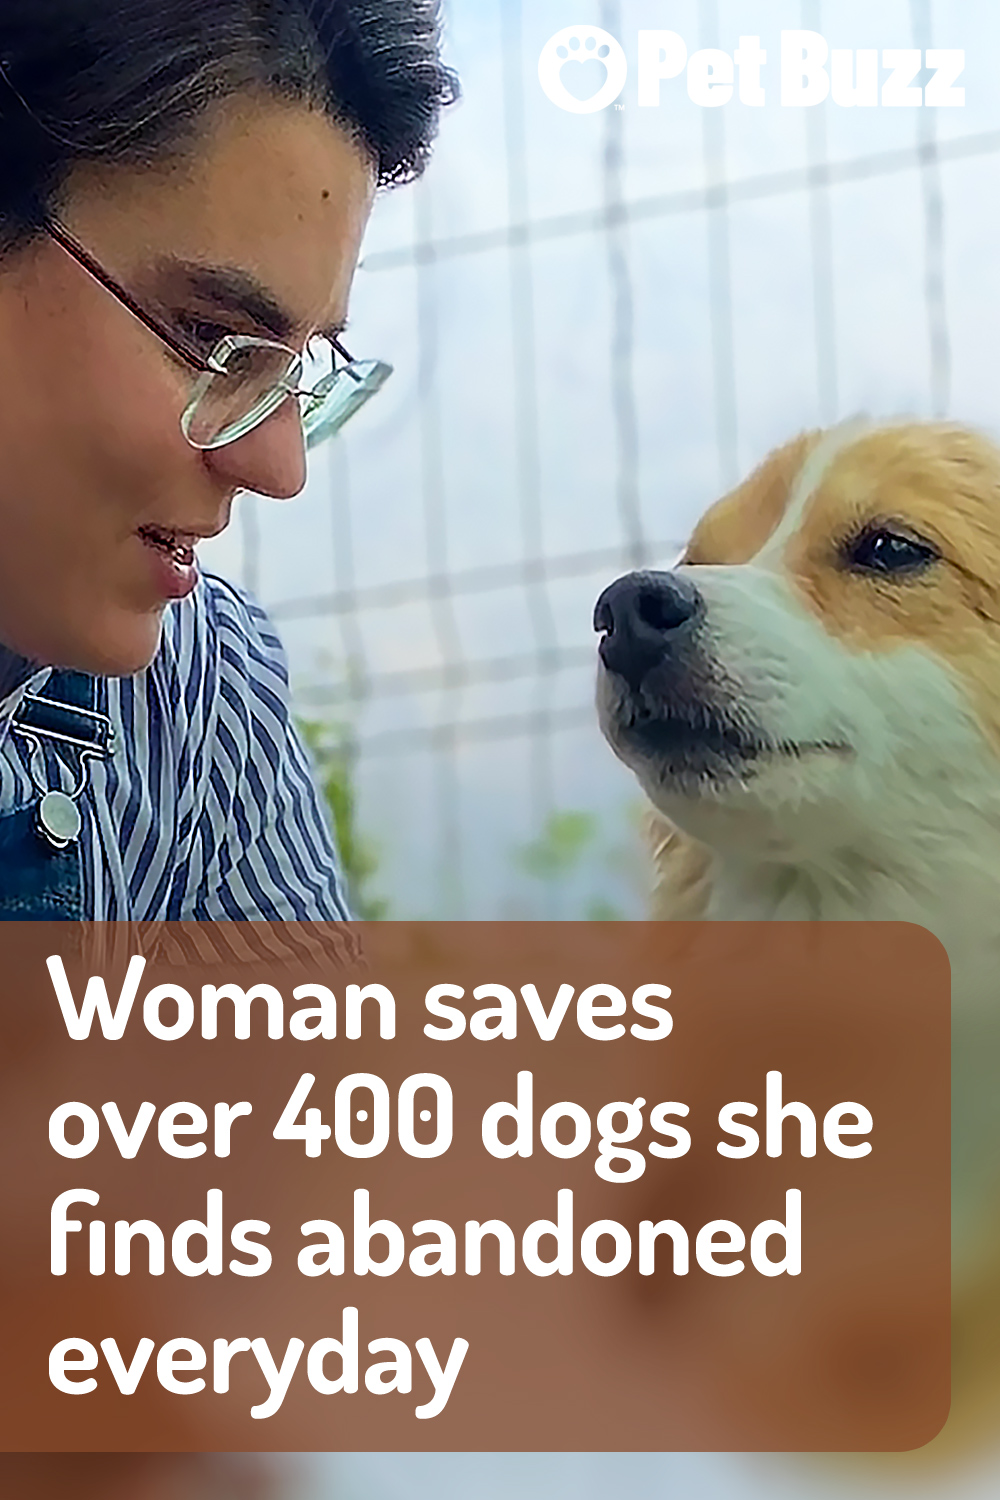 Woman saves over 400 dogs she finds abandoned everyday